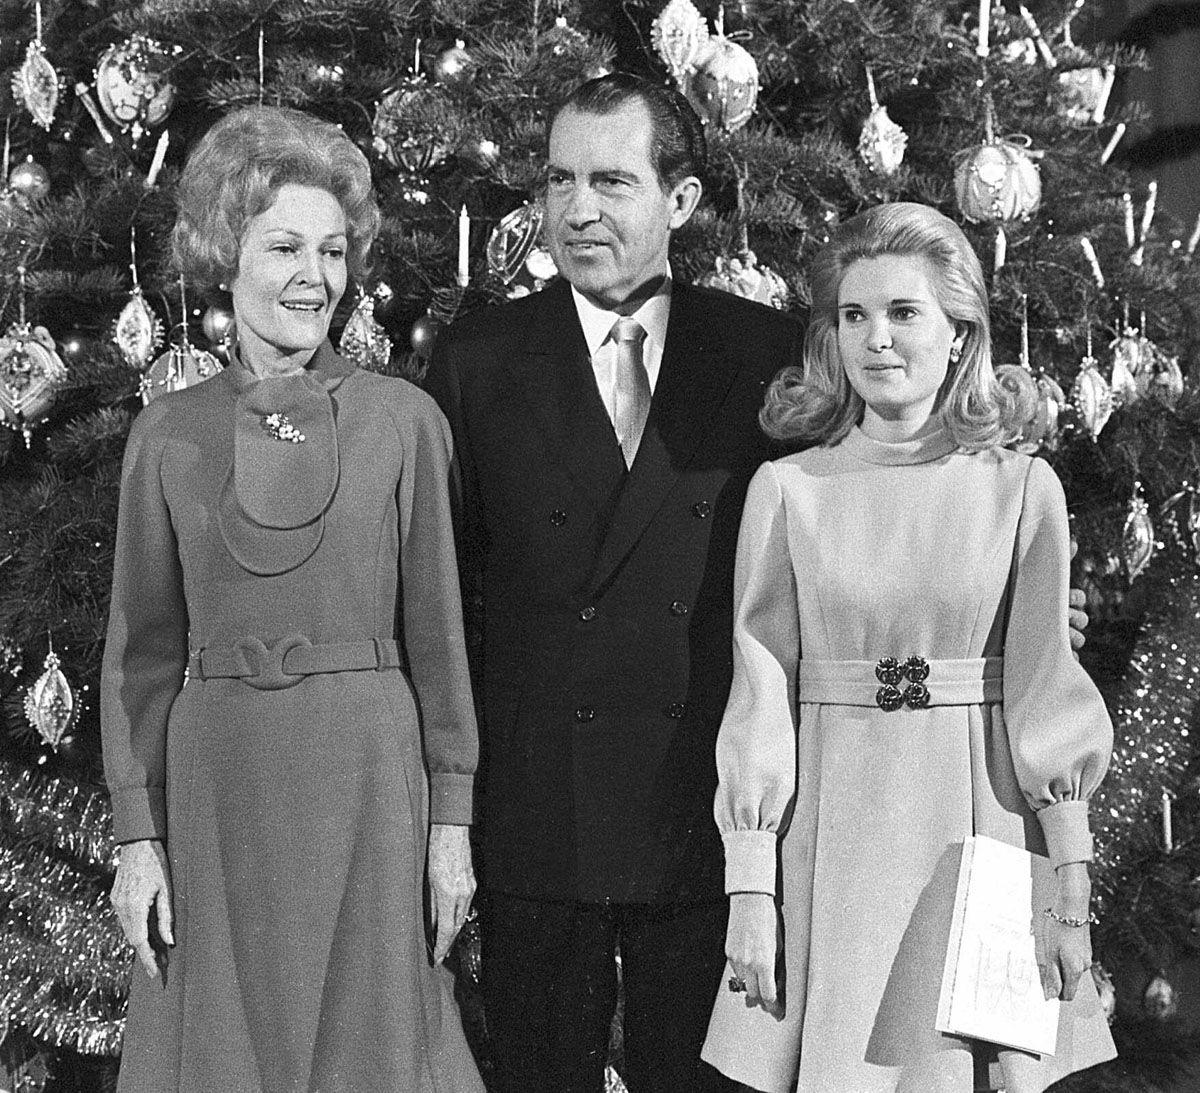 U.S. President Richard Nixon, first lady Pat Nixon and their daughter Tricia stand beside the Christmas tree in the main lobby of the White House on Dec. 21, 1969, following a worship service.   (AP Photo)